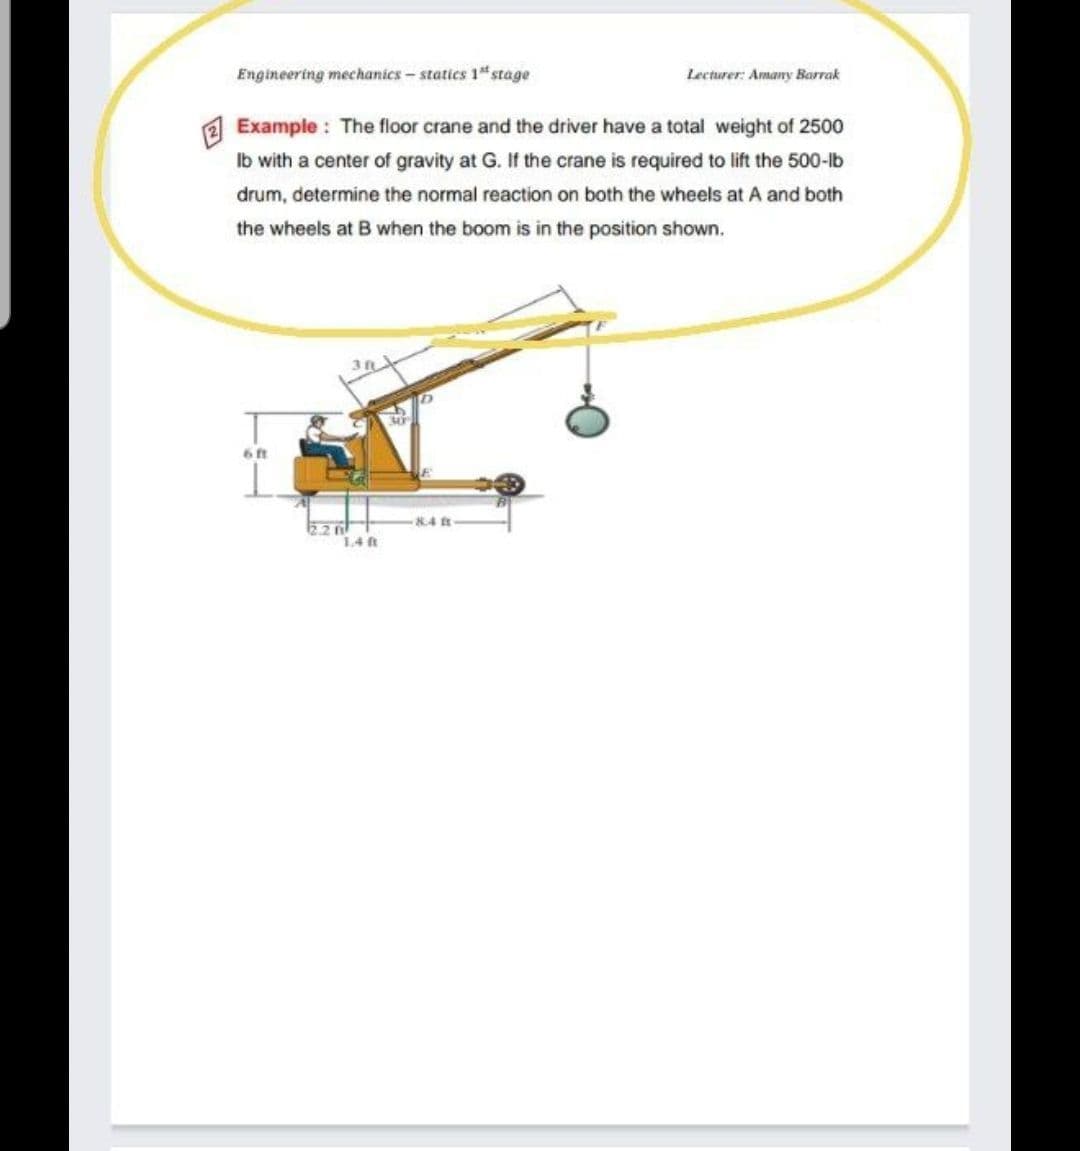 Engineering mechanics- statics 1 stage
Lecturer: Amany Barrak
Example : The floor crane and the driver have a total weight of 2500
Ib with a center of gravity at G. If the crane is required to lift the 500-lb
drum, determine the normal reaction on both the wheels at A and both
the wheels at B when the boom is in the position shown.
30
6 ft
84 t
1.4 ft
